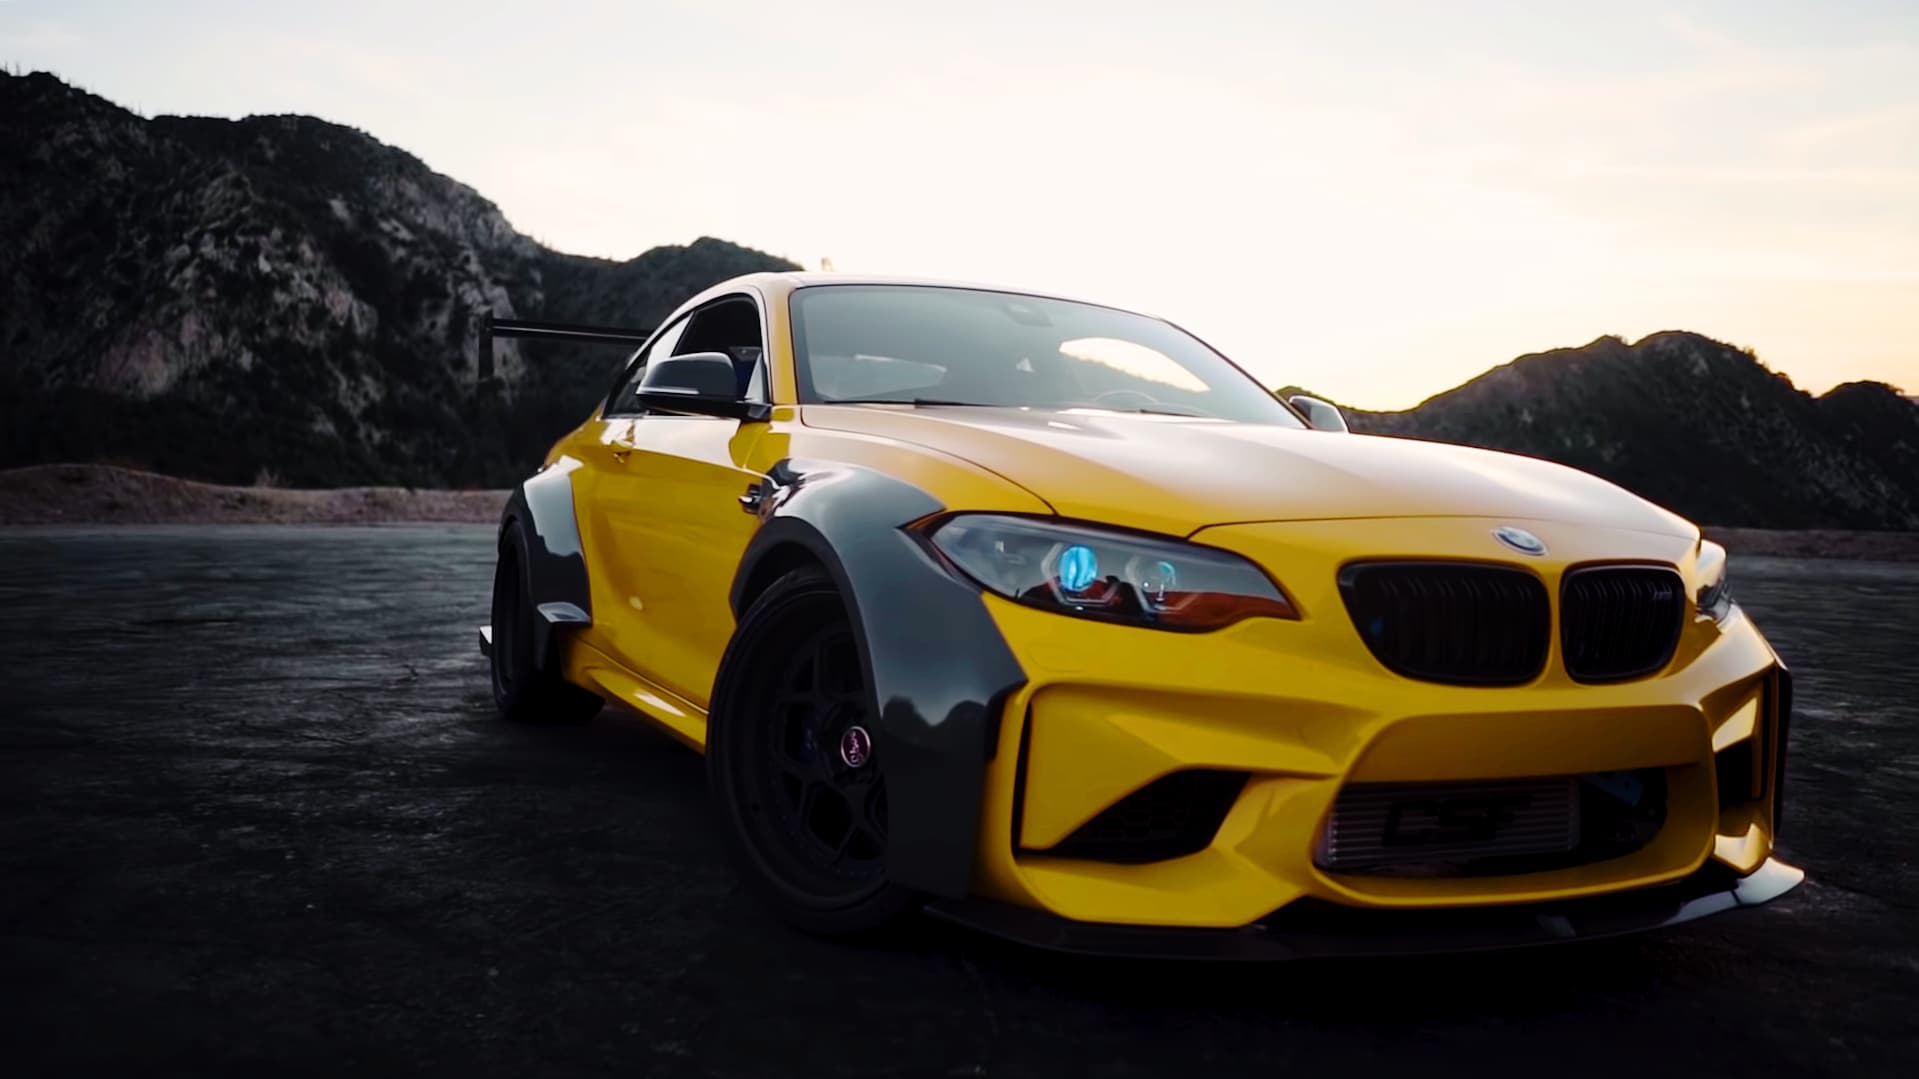 Take A Look At This M2 Drift Build